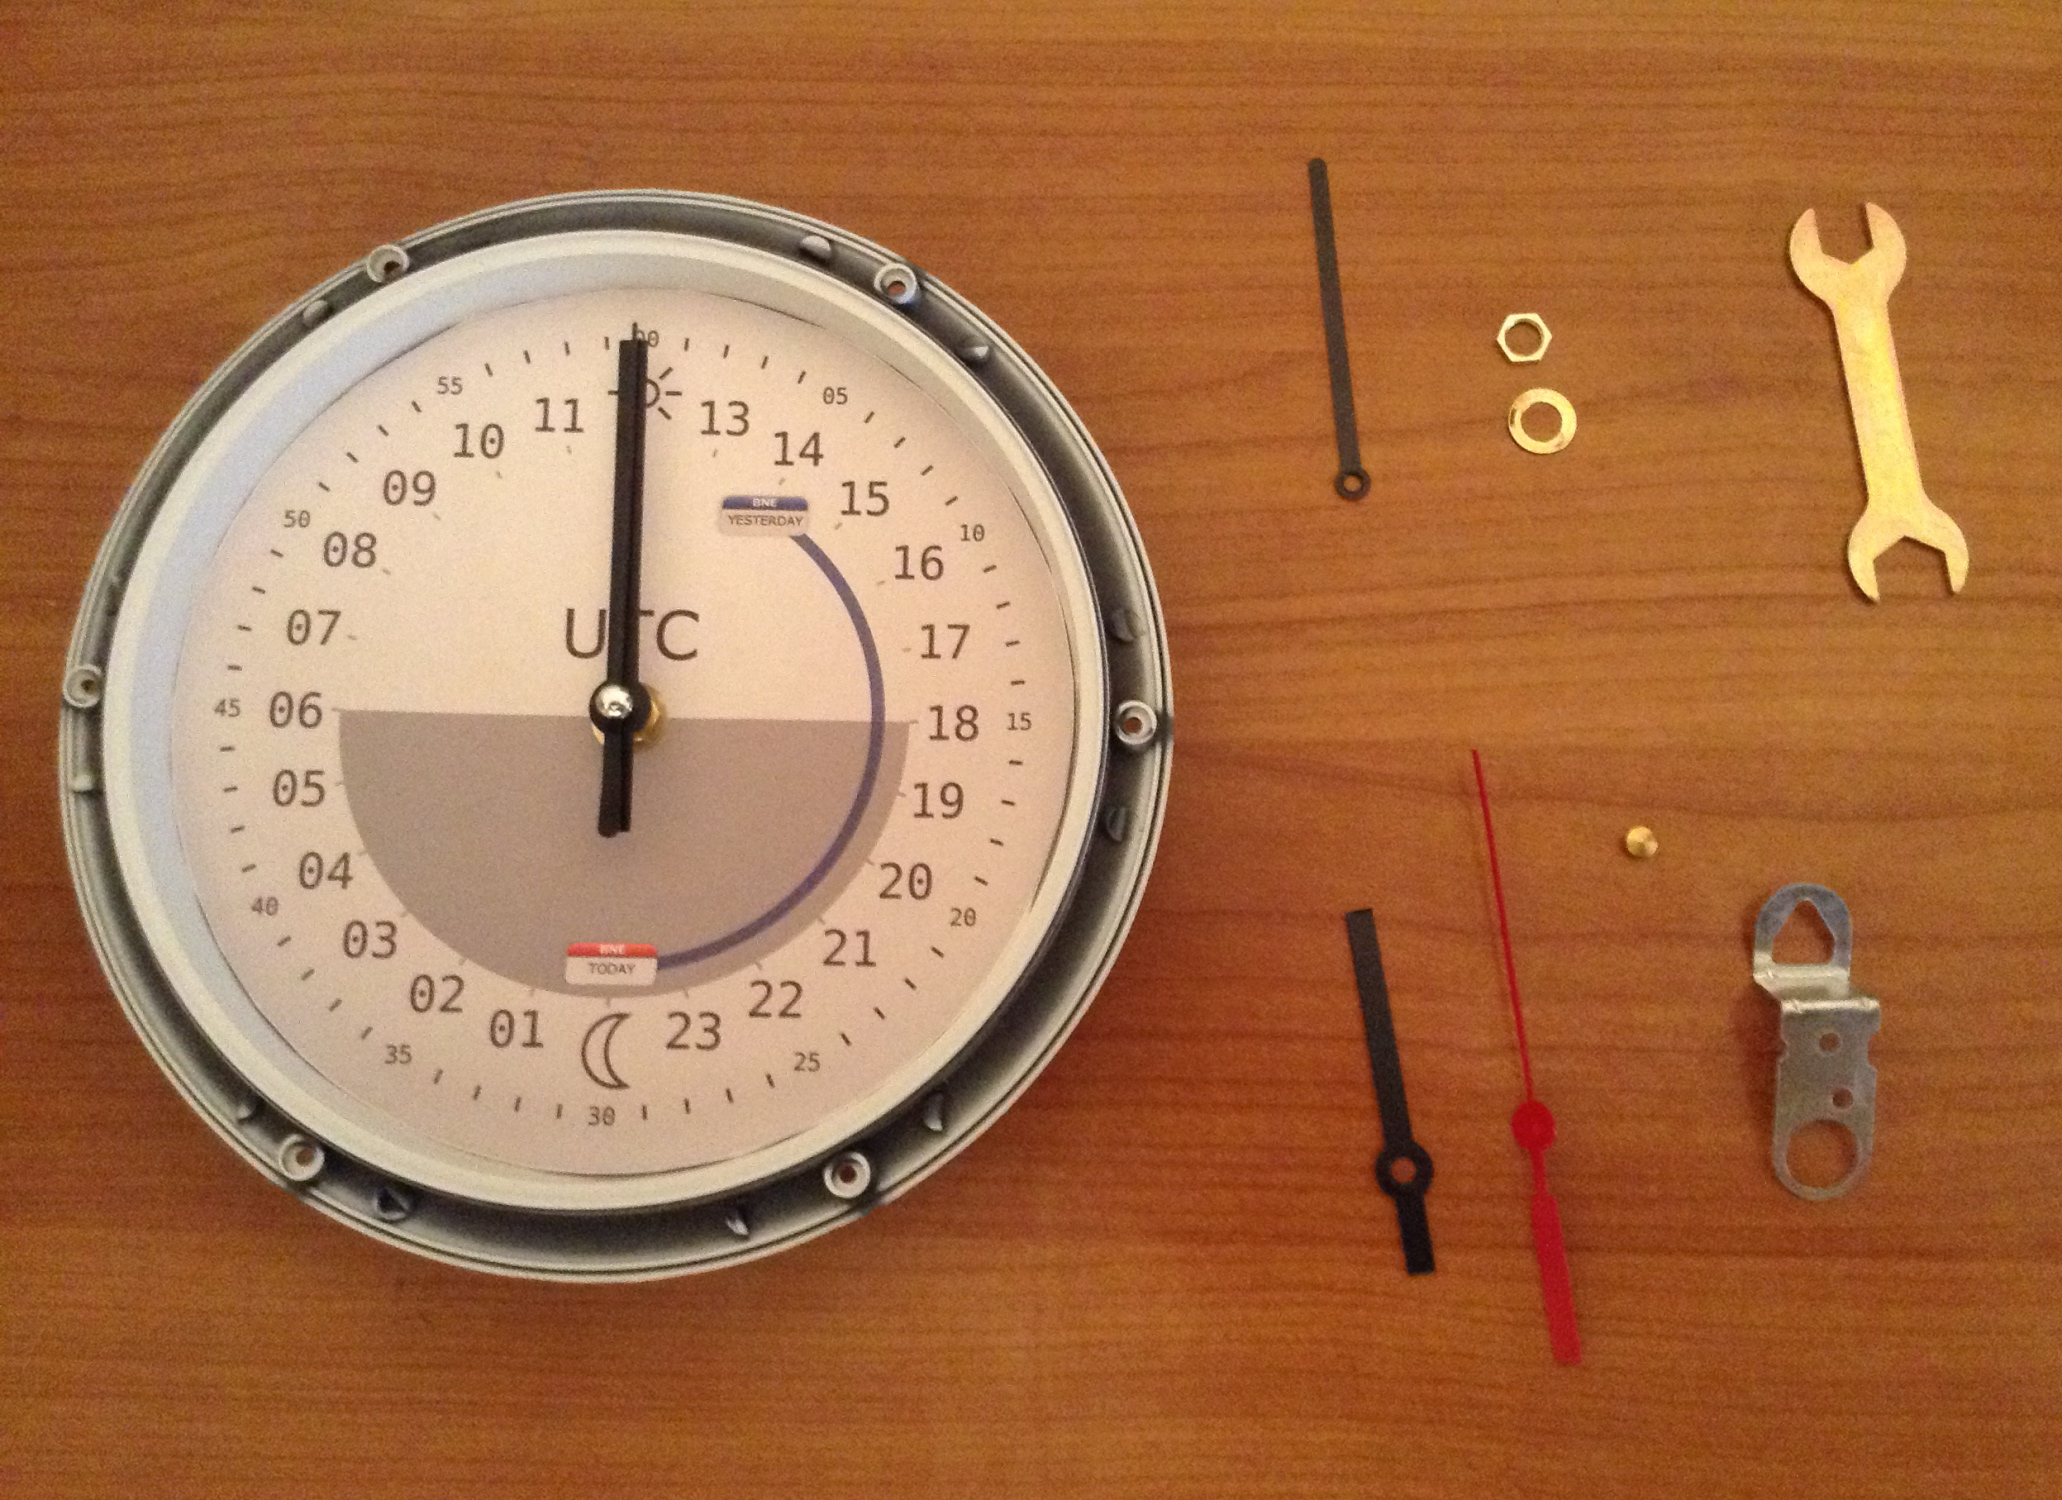 7: New dials and hands